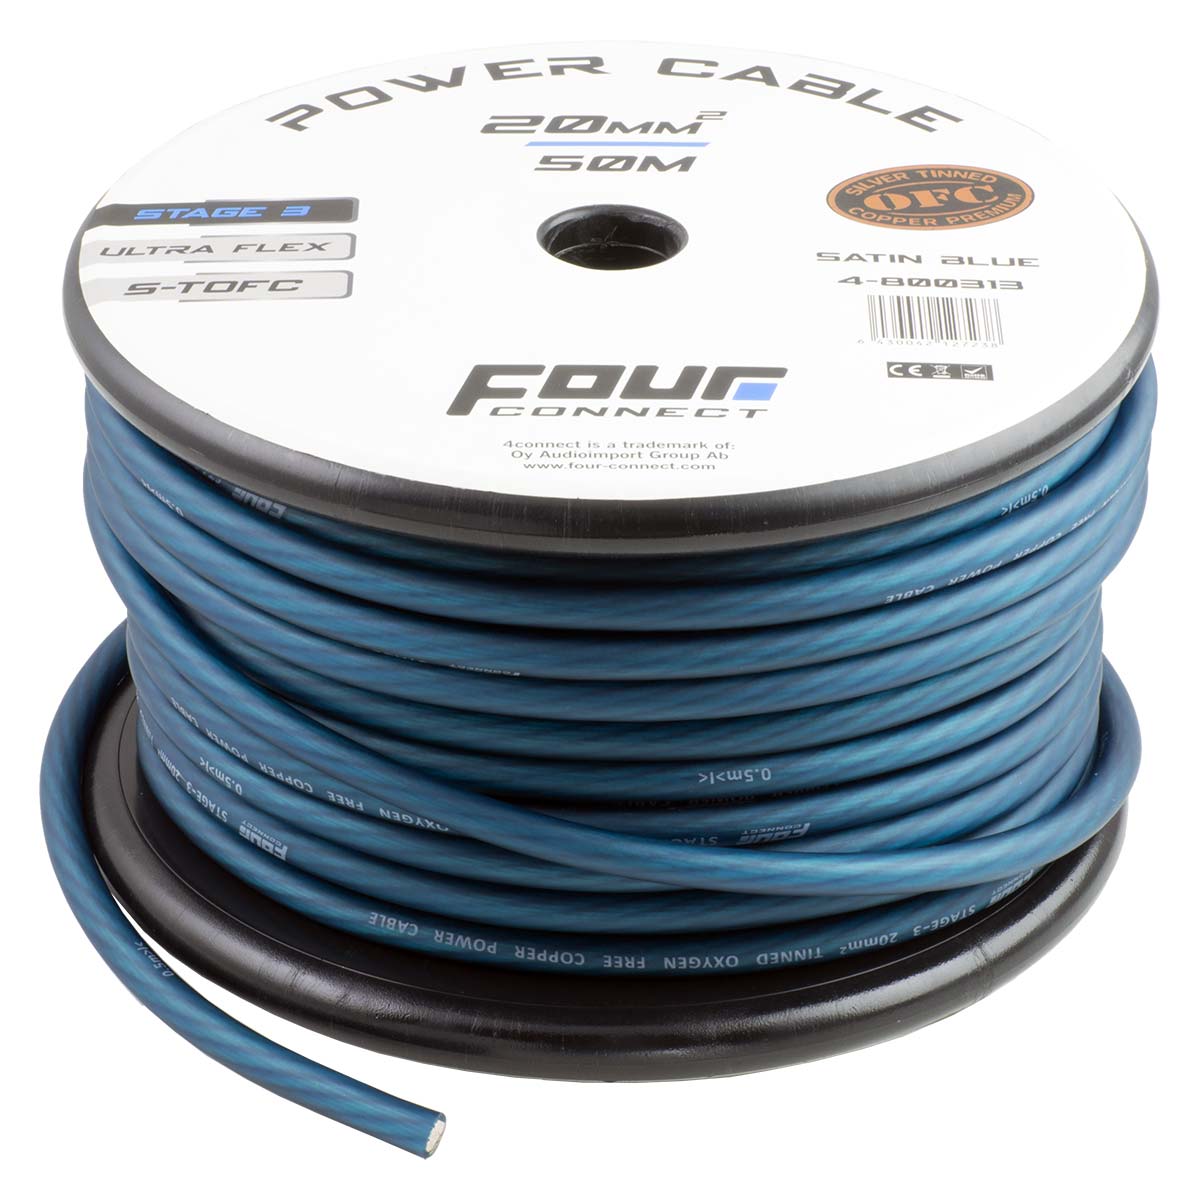 FOUR Connect 4-800313 STAGE3 20mm2 Satin Blue S-TOFC virtakaapeli